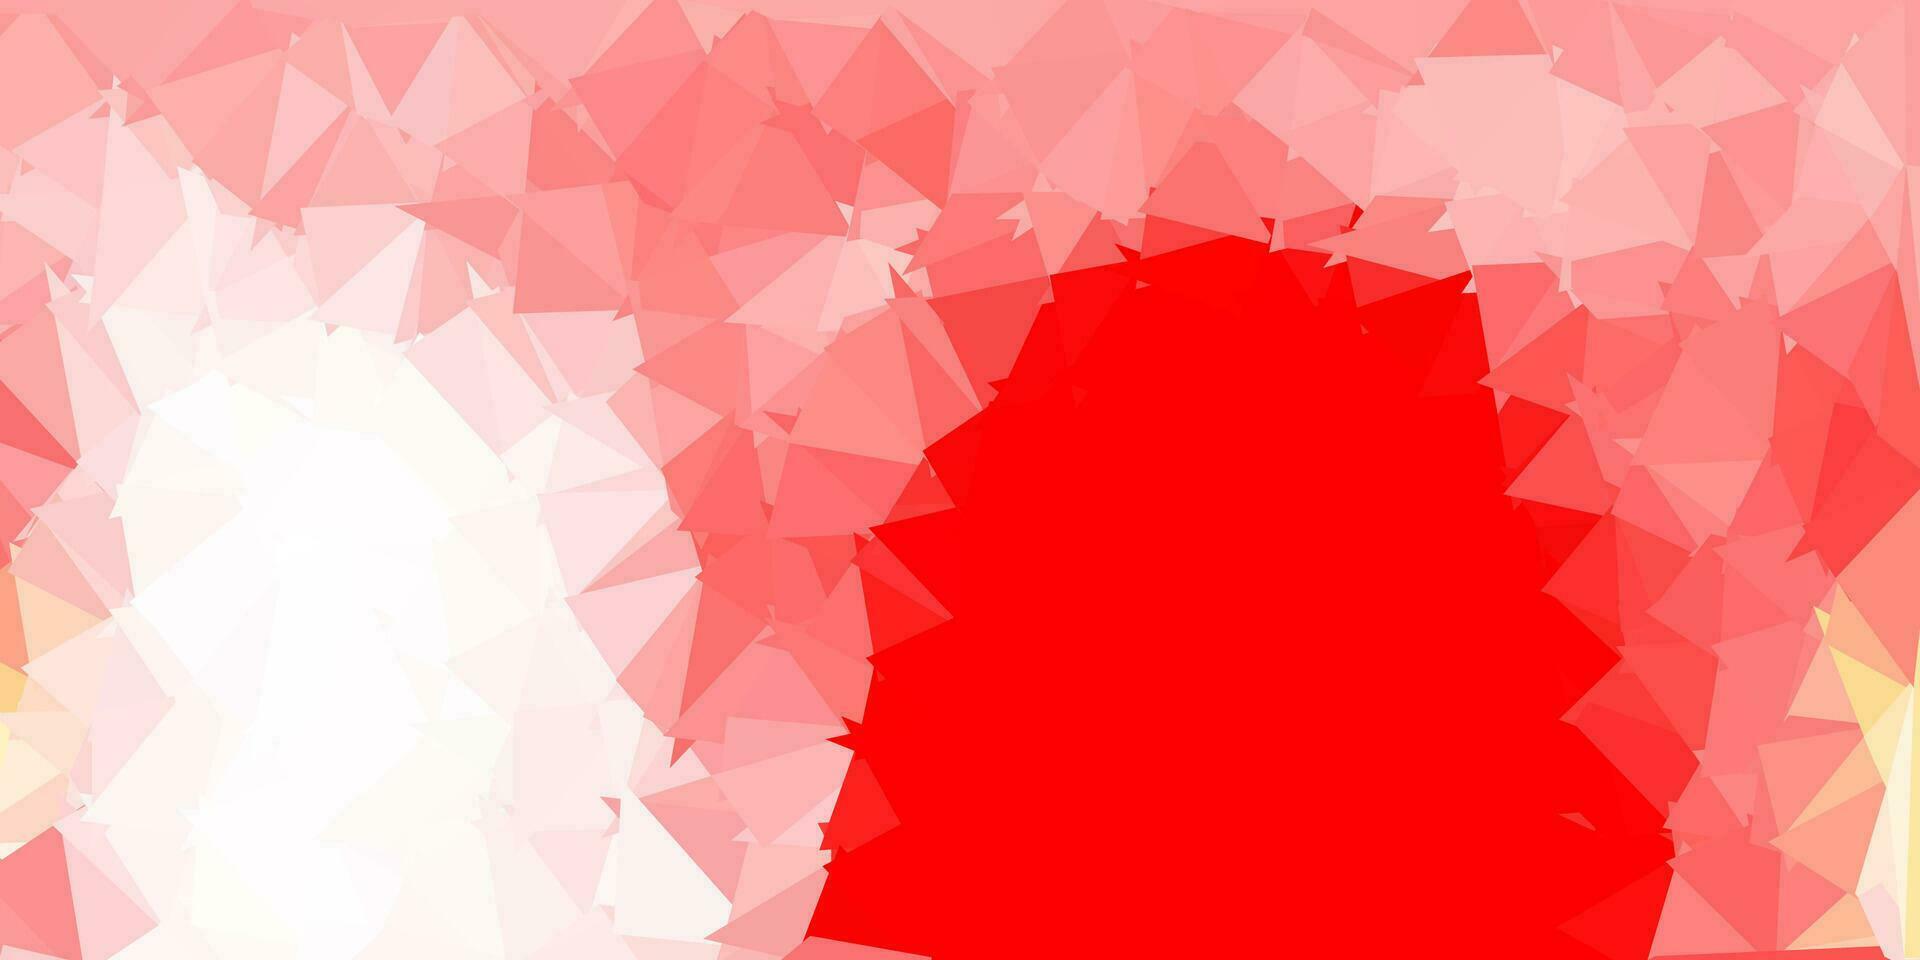 Light red vector abstract triangle pattern.